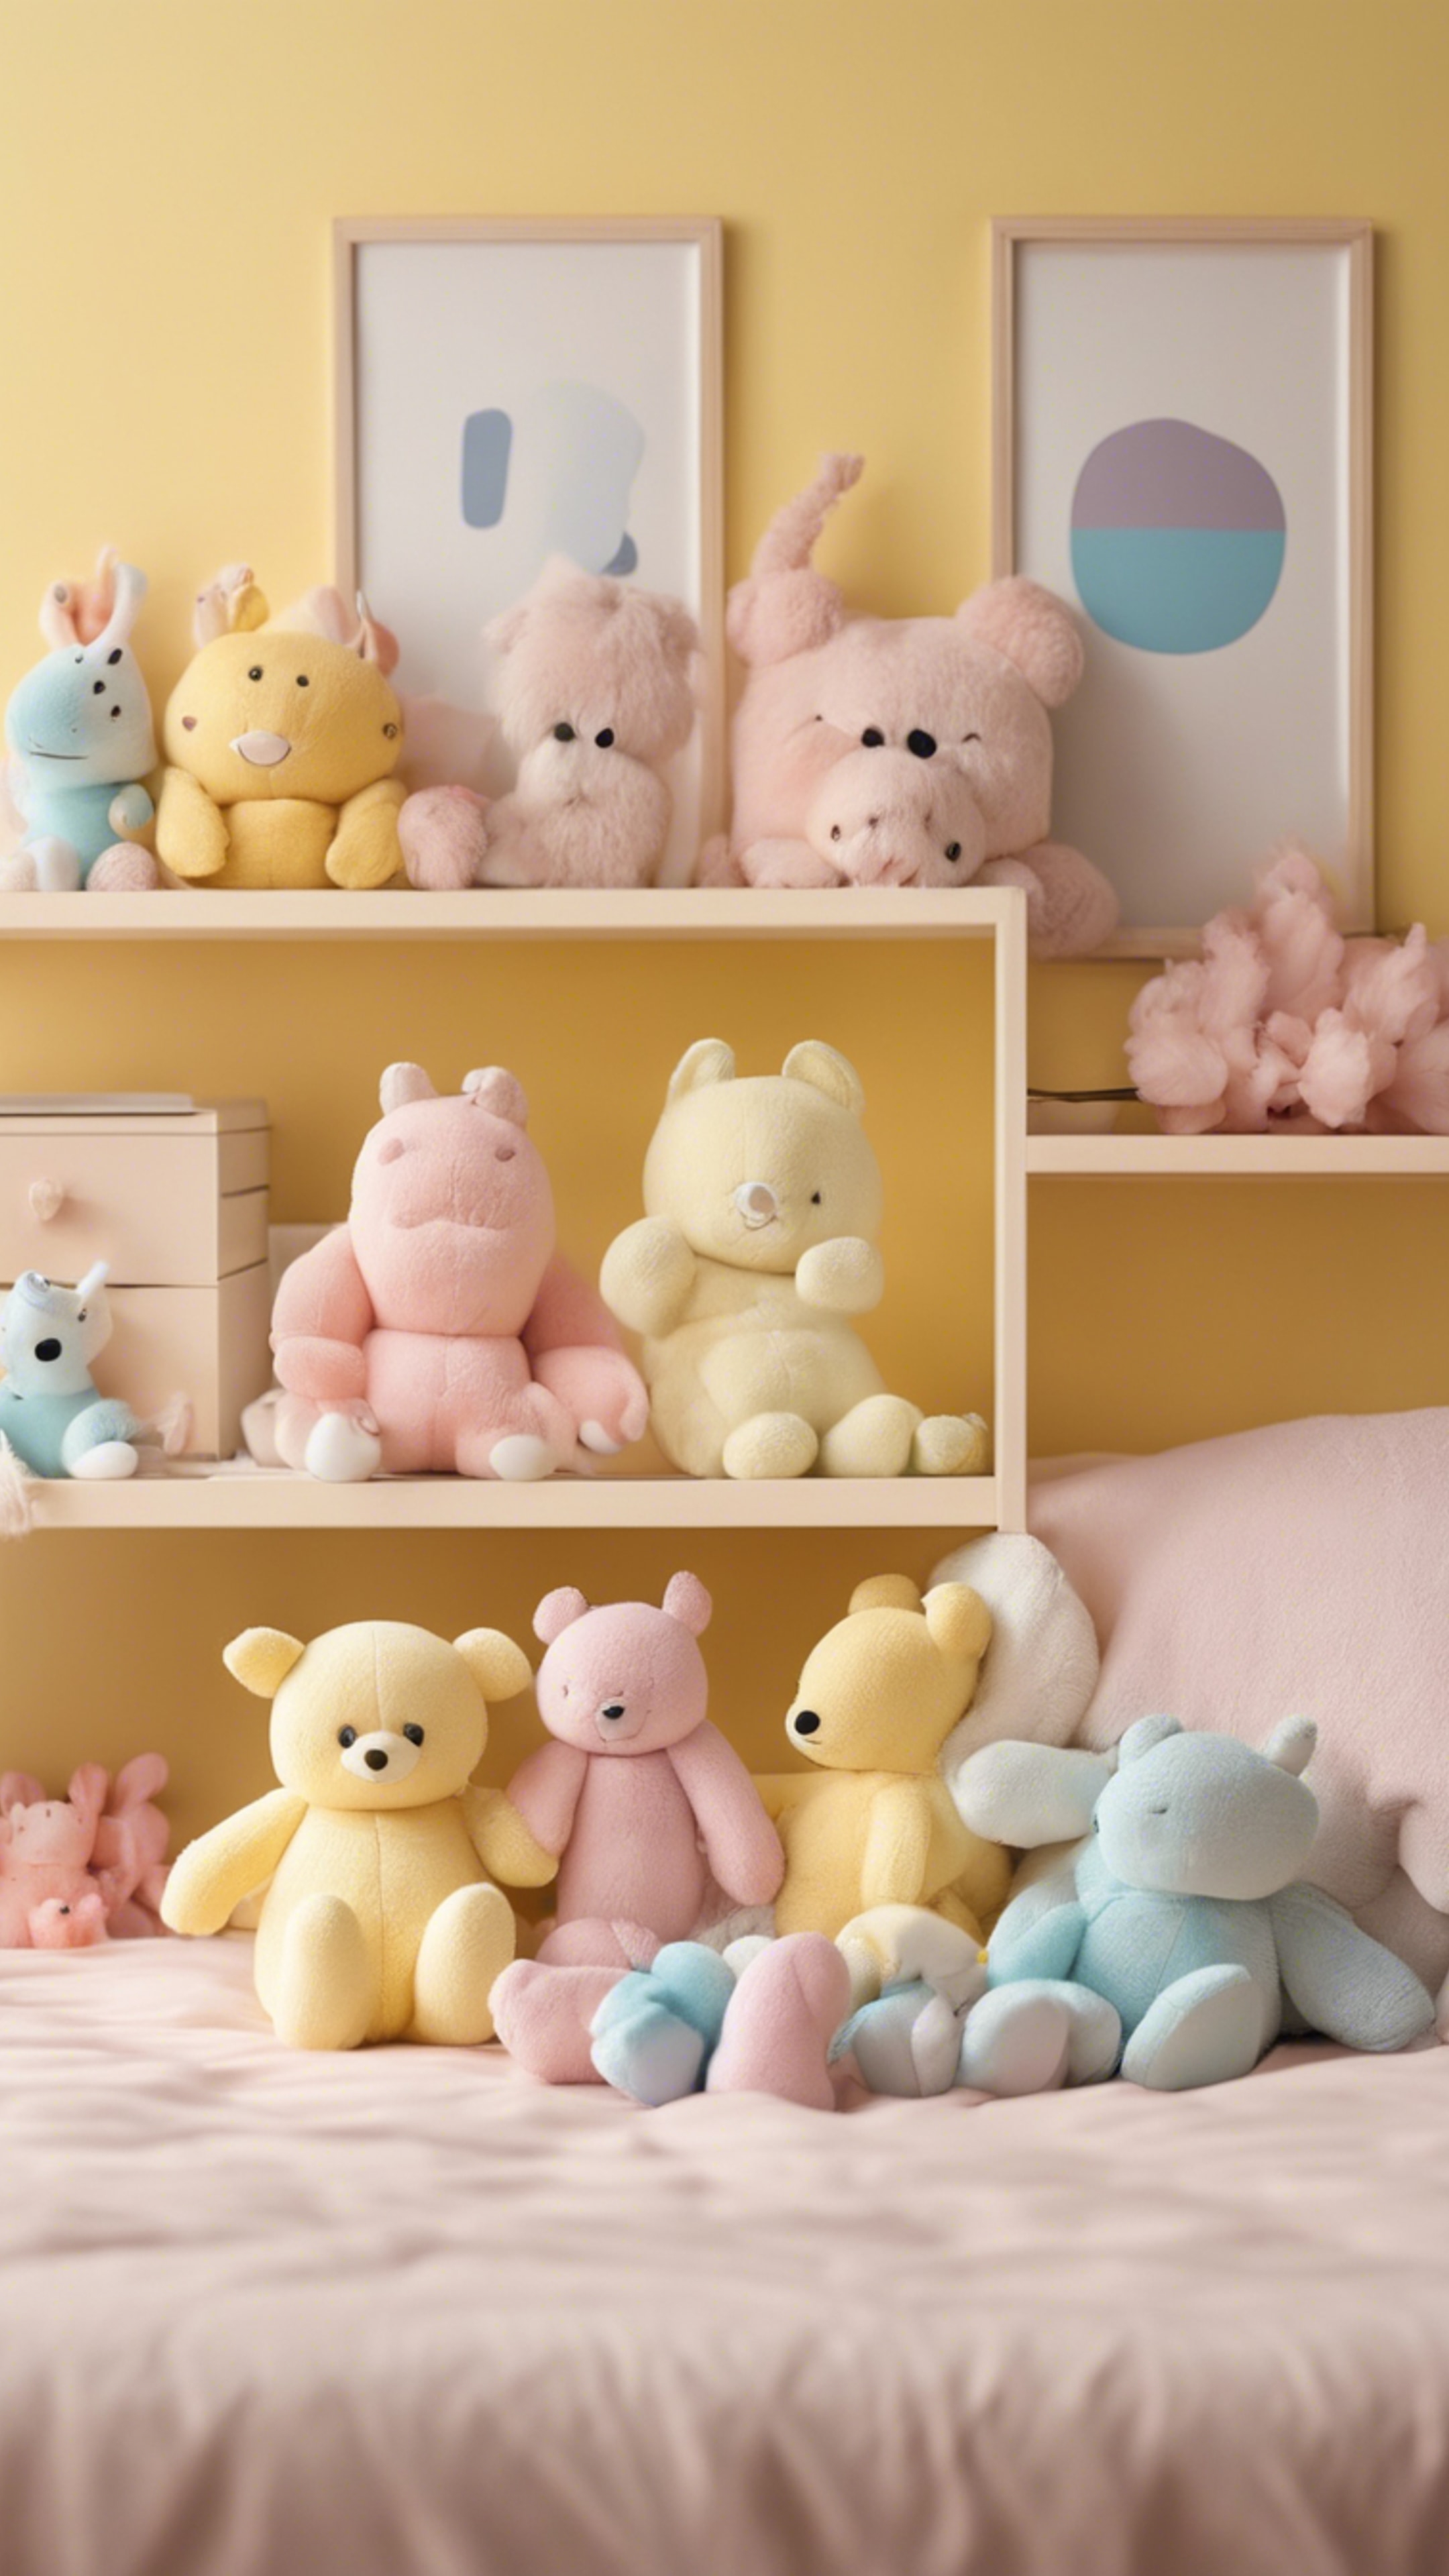 Tidy bedroom with pastel yellow walls decorated with kawaii plush toys. 墙纸[bea5098546c74f3e98b3]